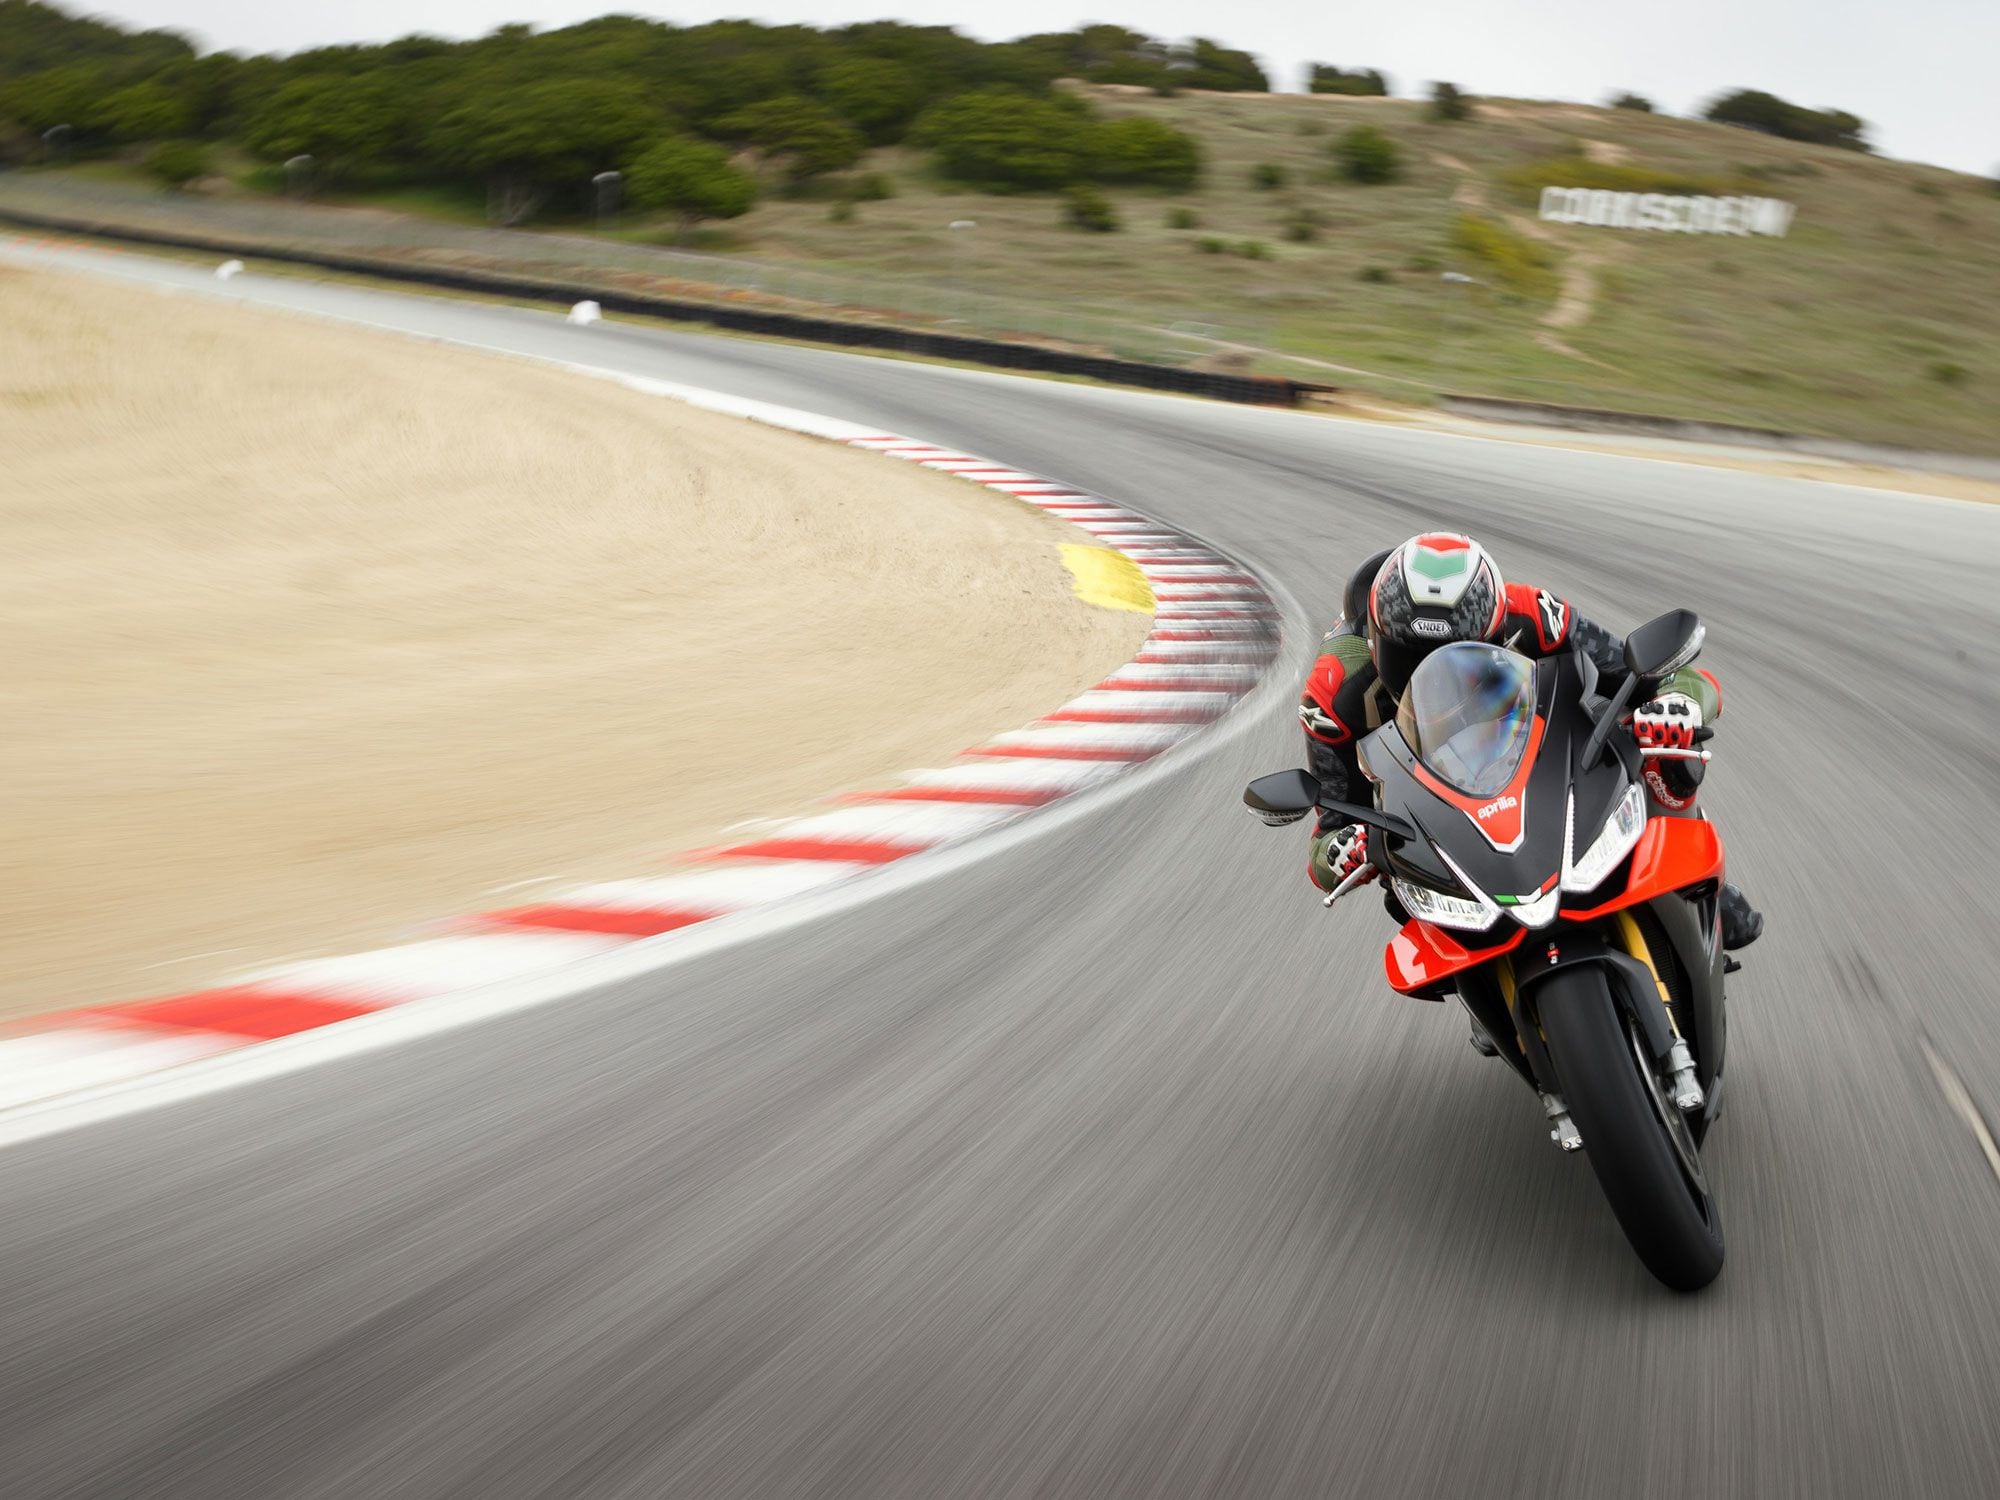 Aprilia asserts dominance in the liter-and-above-sized literbike class with its carefully updated RSV4 Factory superbike.